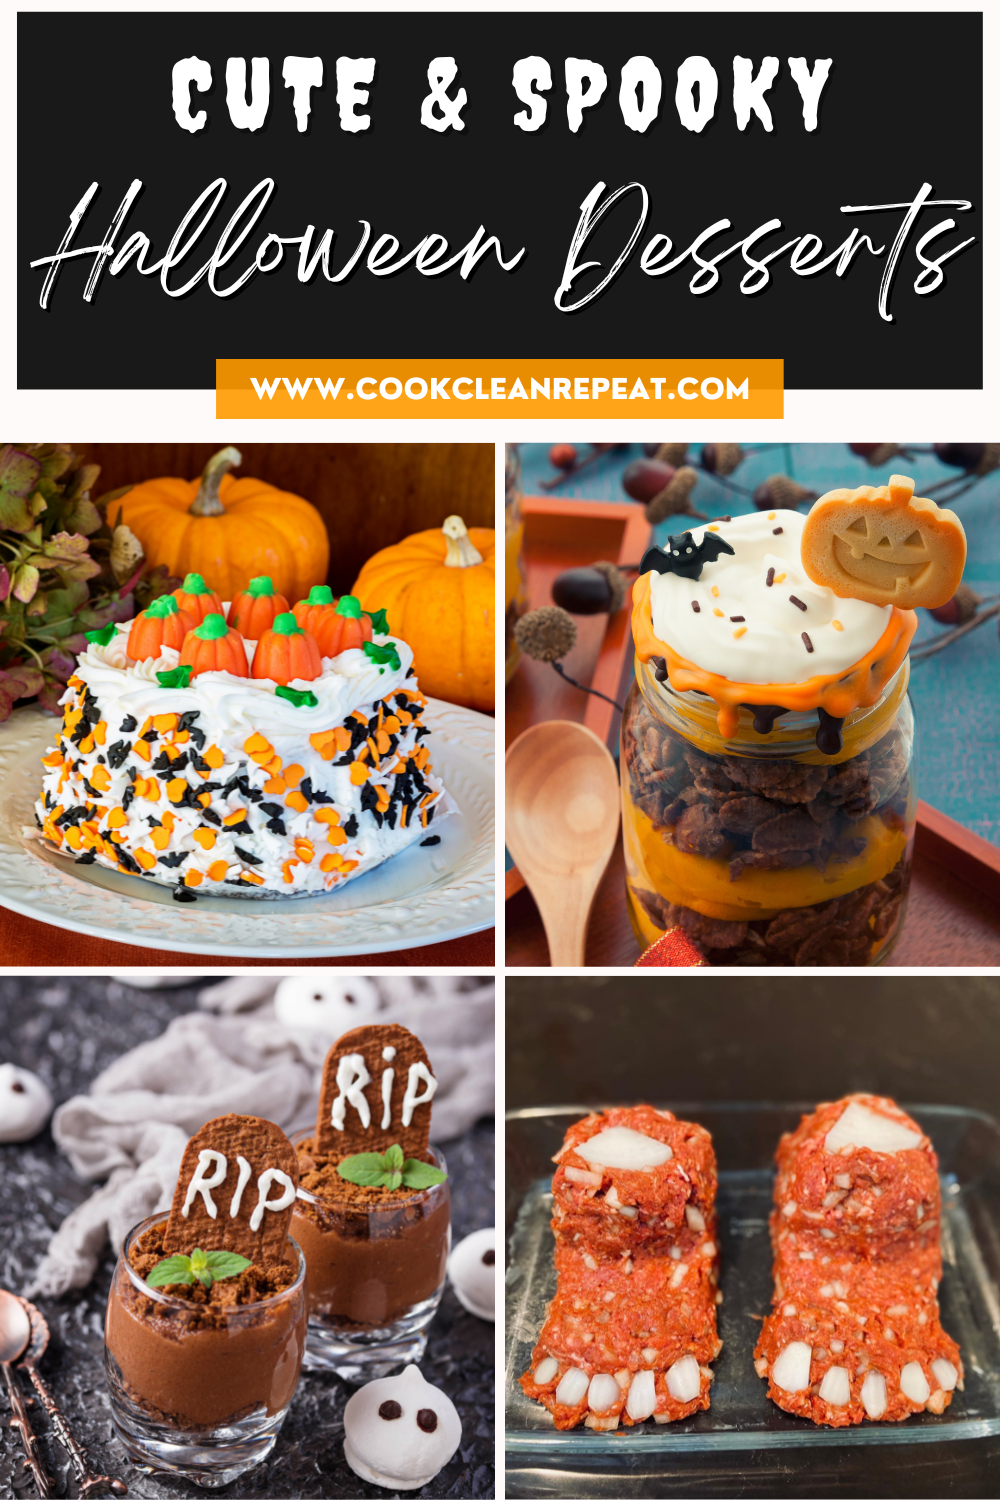 Pin showing the title Cute and Spooky Halloween Desserts